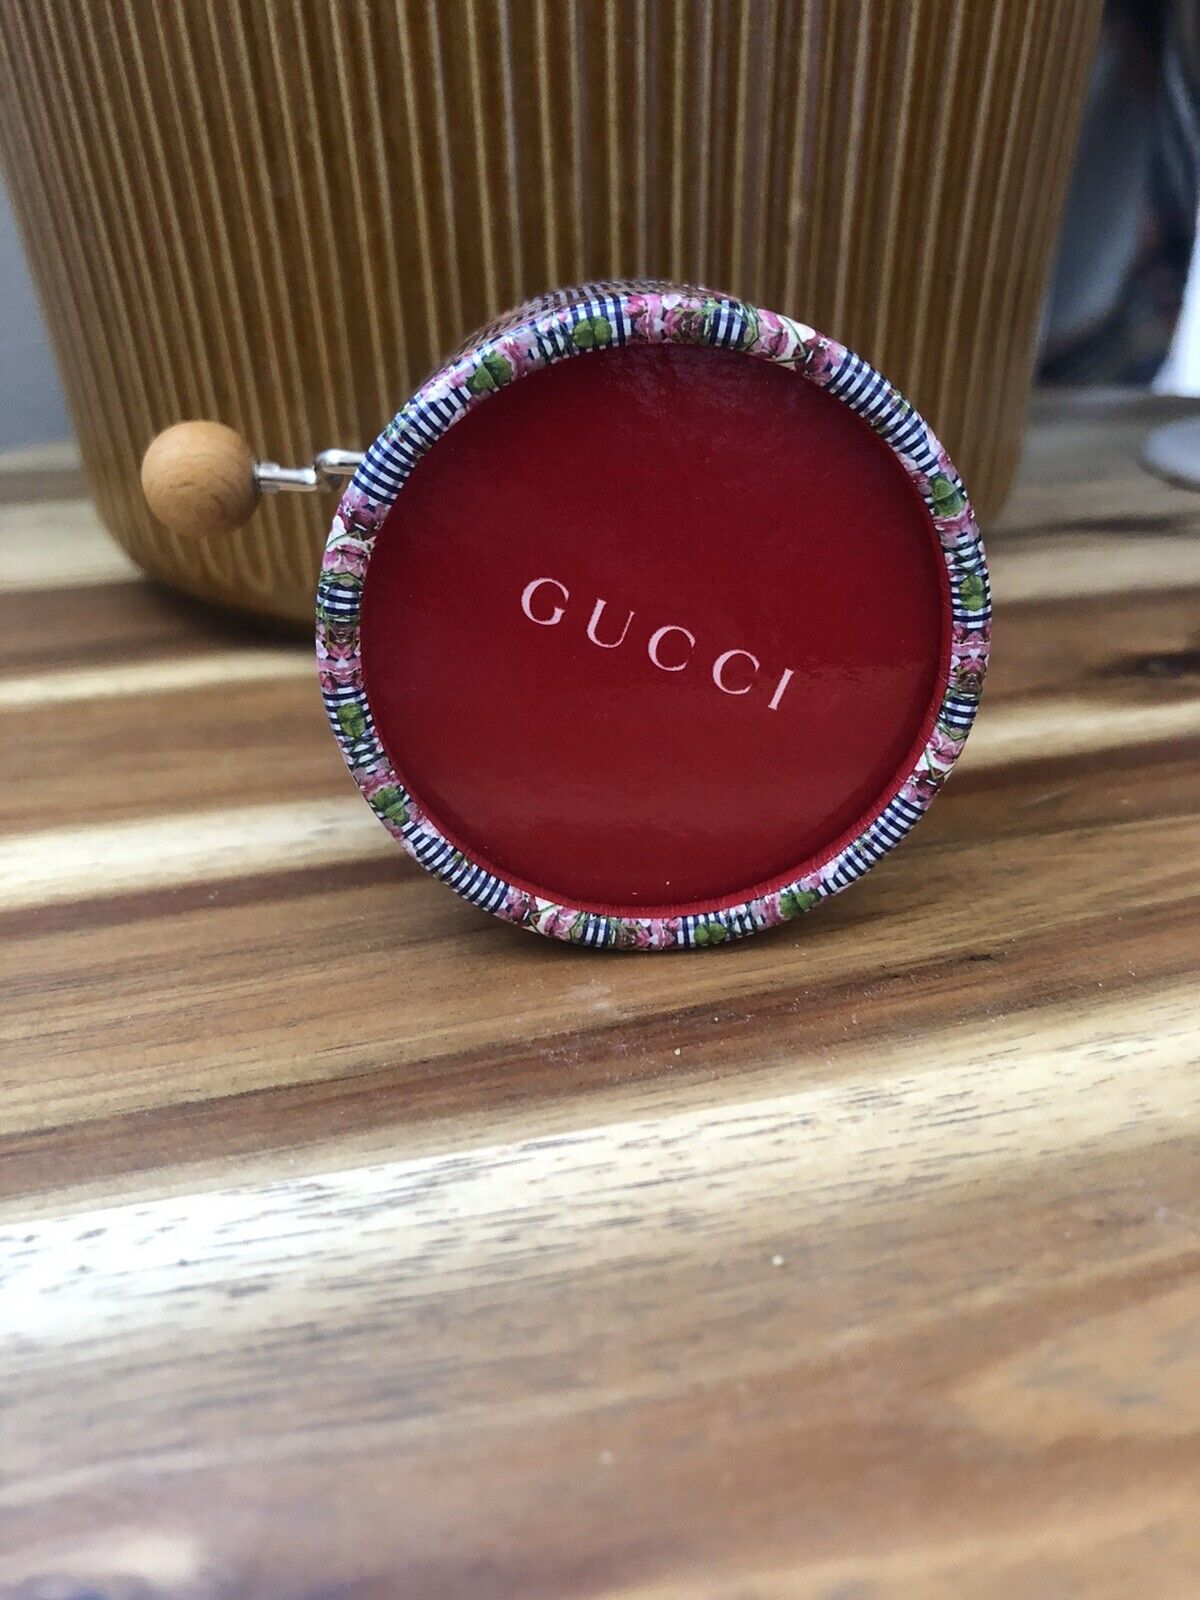 Gucci Music Box. Beautiful Floral Plaid Design. Wind Up. Tested And Works.